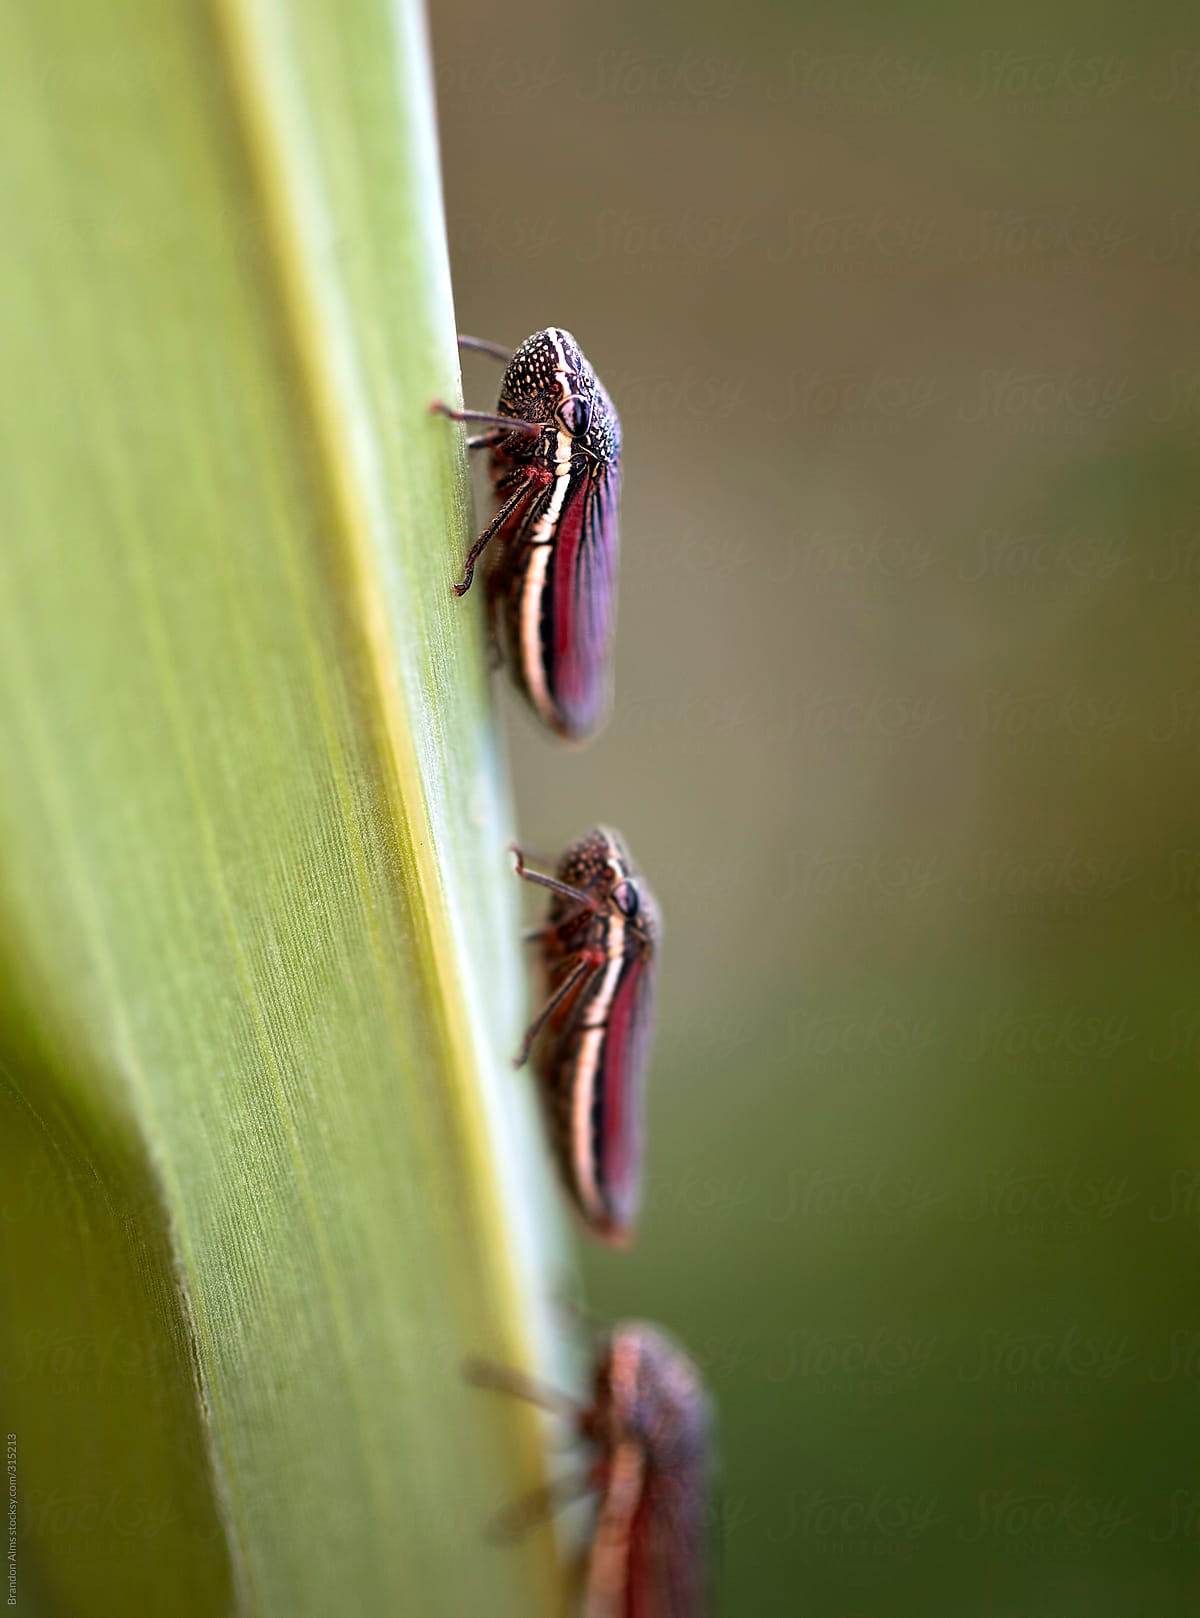 Group of Leafhopper Bugs on a Blade of Grass